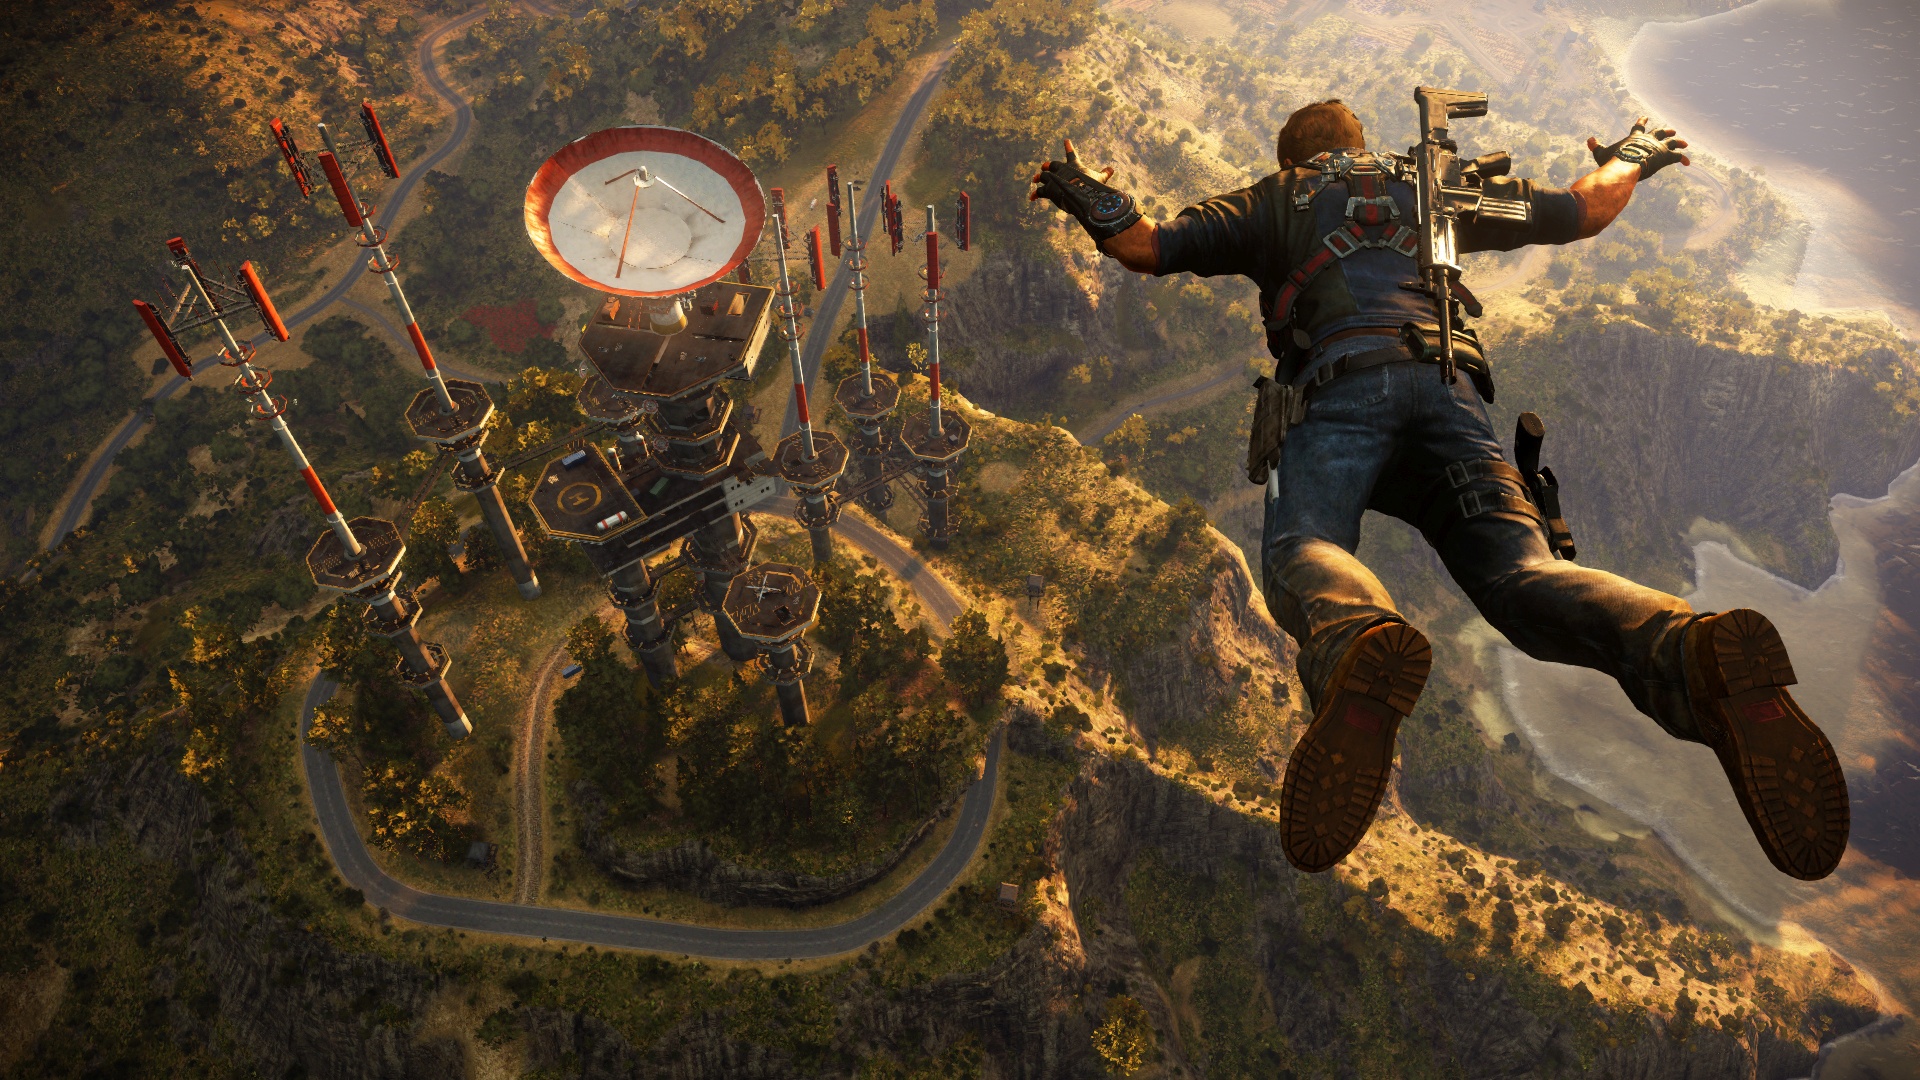 New “Just Cause 3” Trailer Released - Reveals a Holiday 2015 Release Date